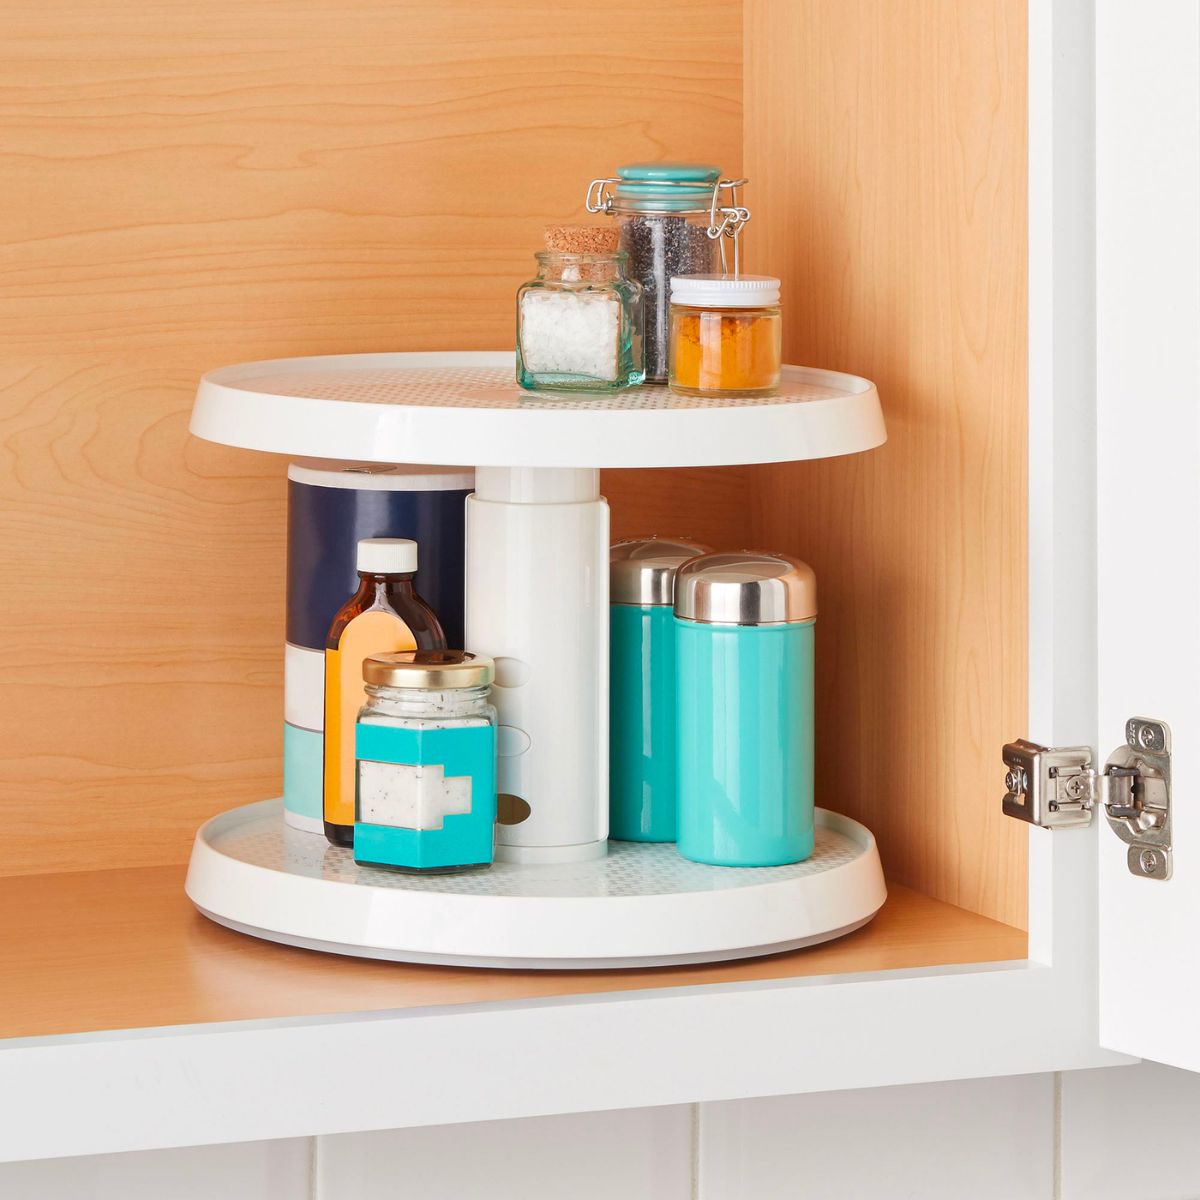 lazy susan being used to store small items